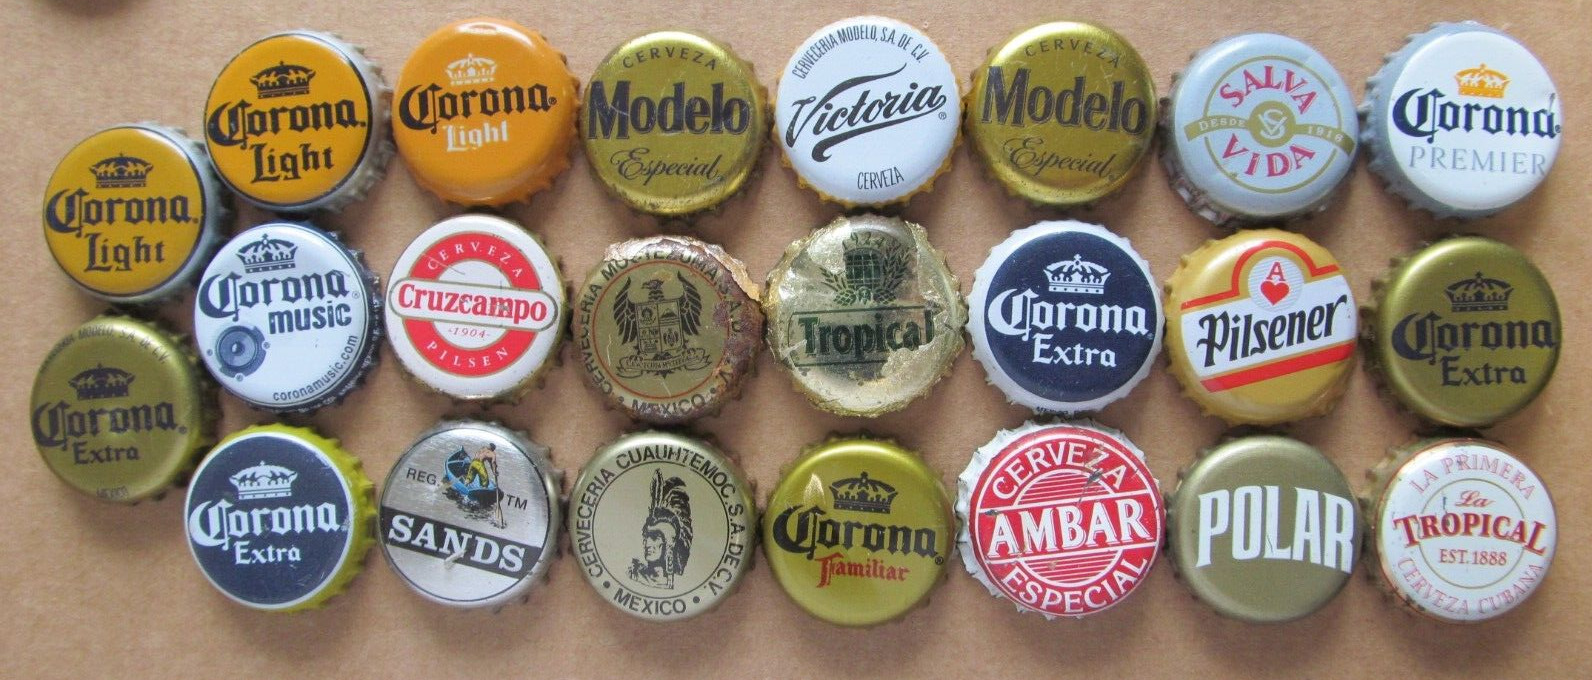 23 DIF SOUTH OF BORDER MEXICO SOUTH AM MOST OBSOLETE CORONA ETC BEER BOTTLE CAP